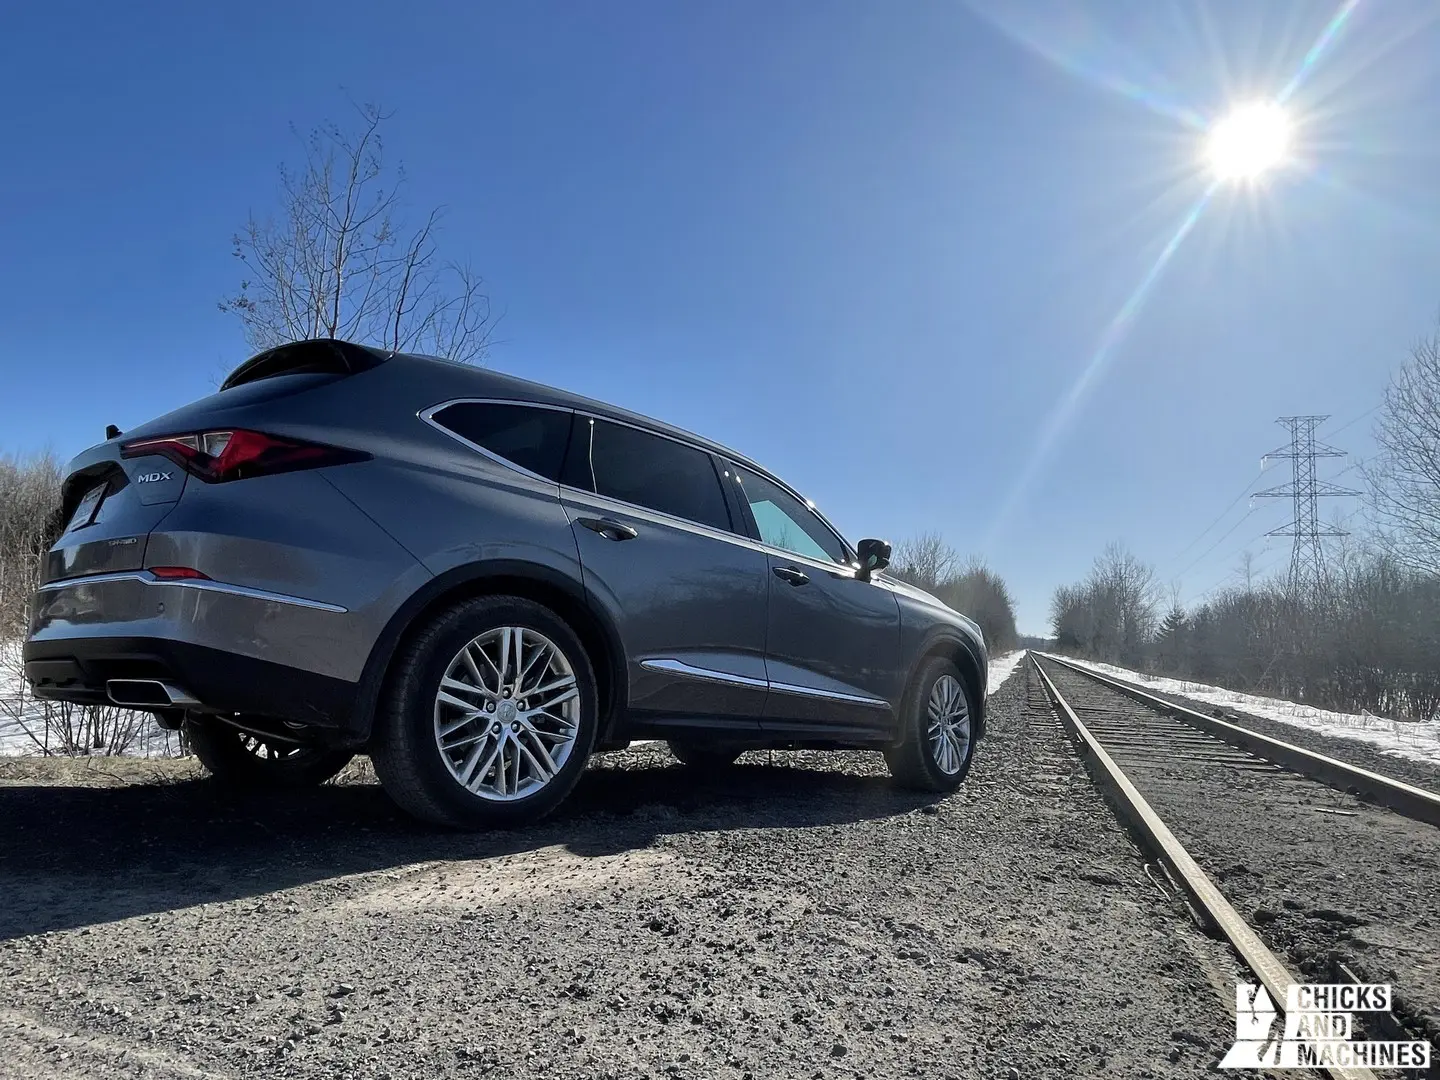 2022 MDX Acura Side View under the Sun